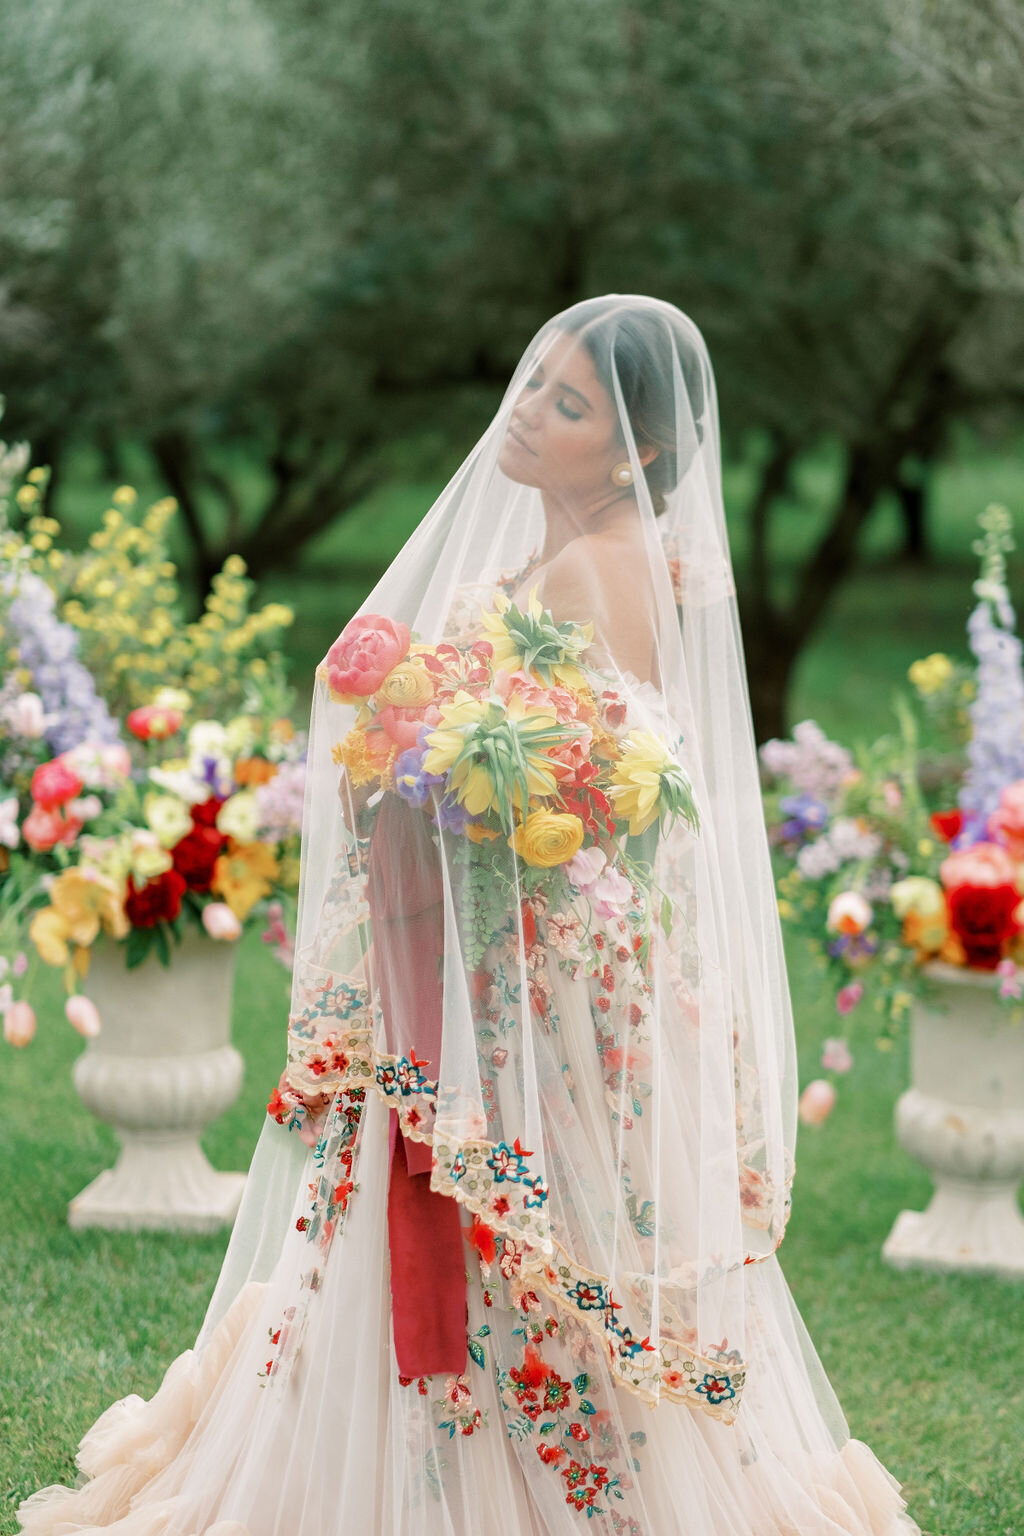 A wedding dress with colored lace